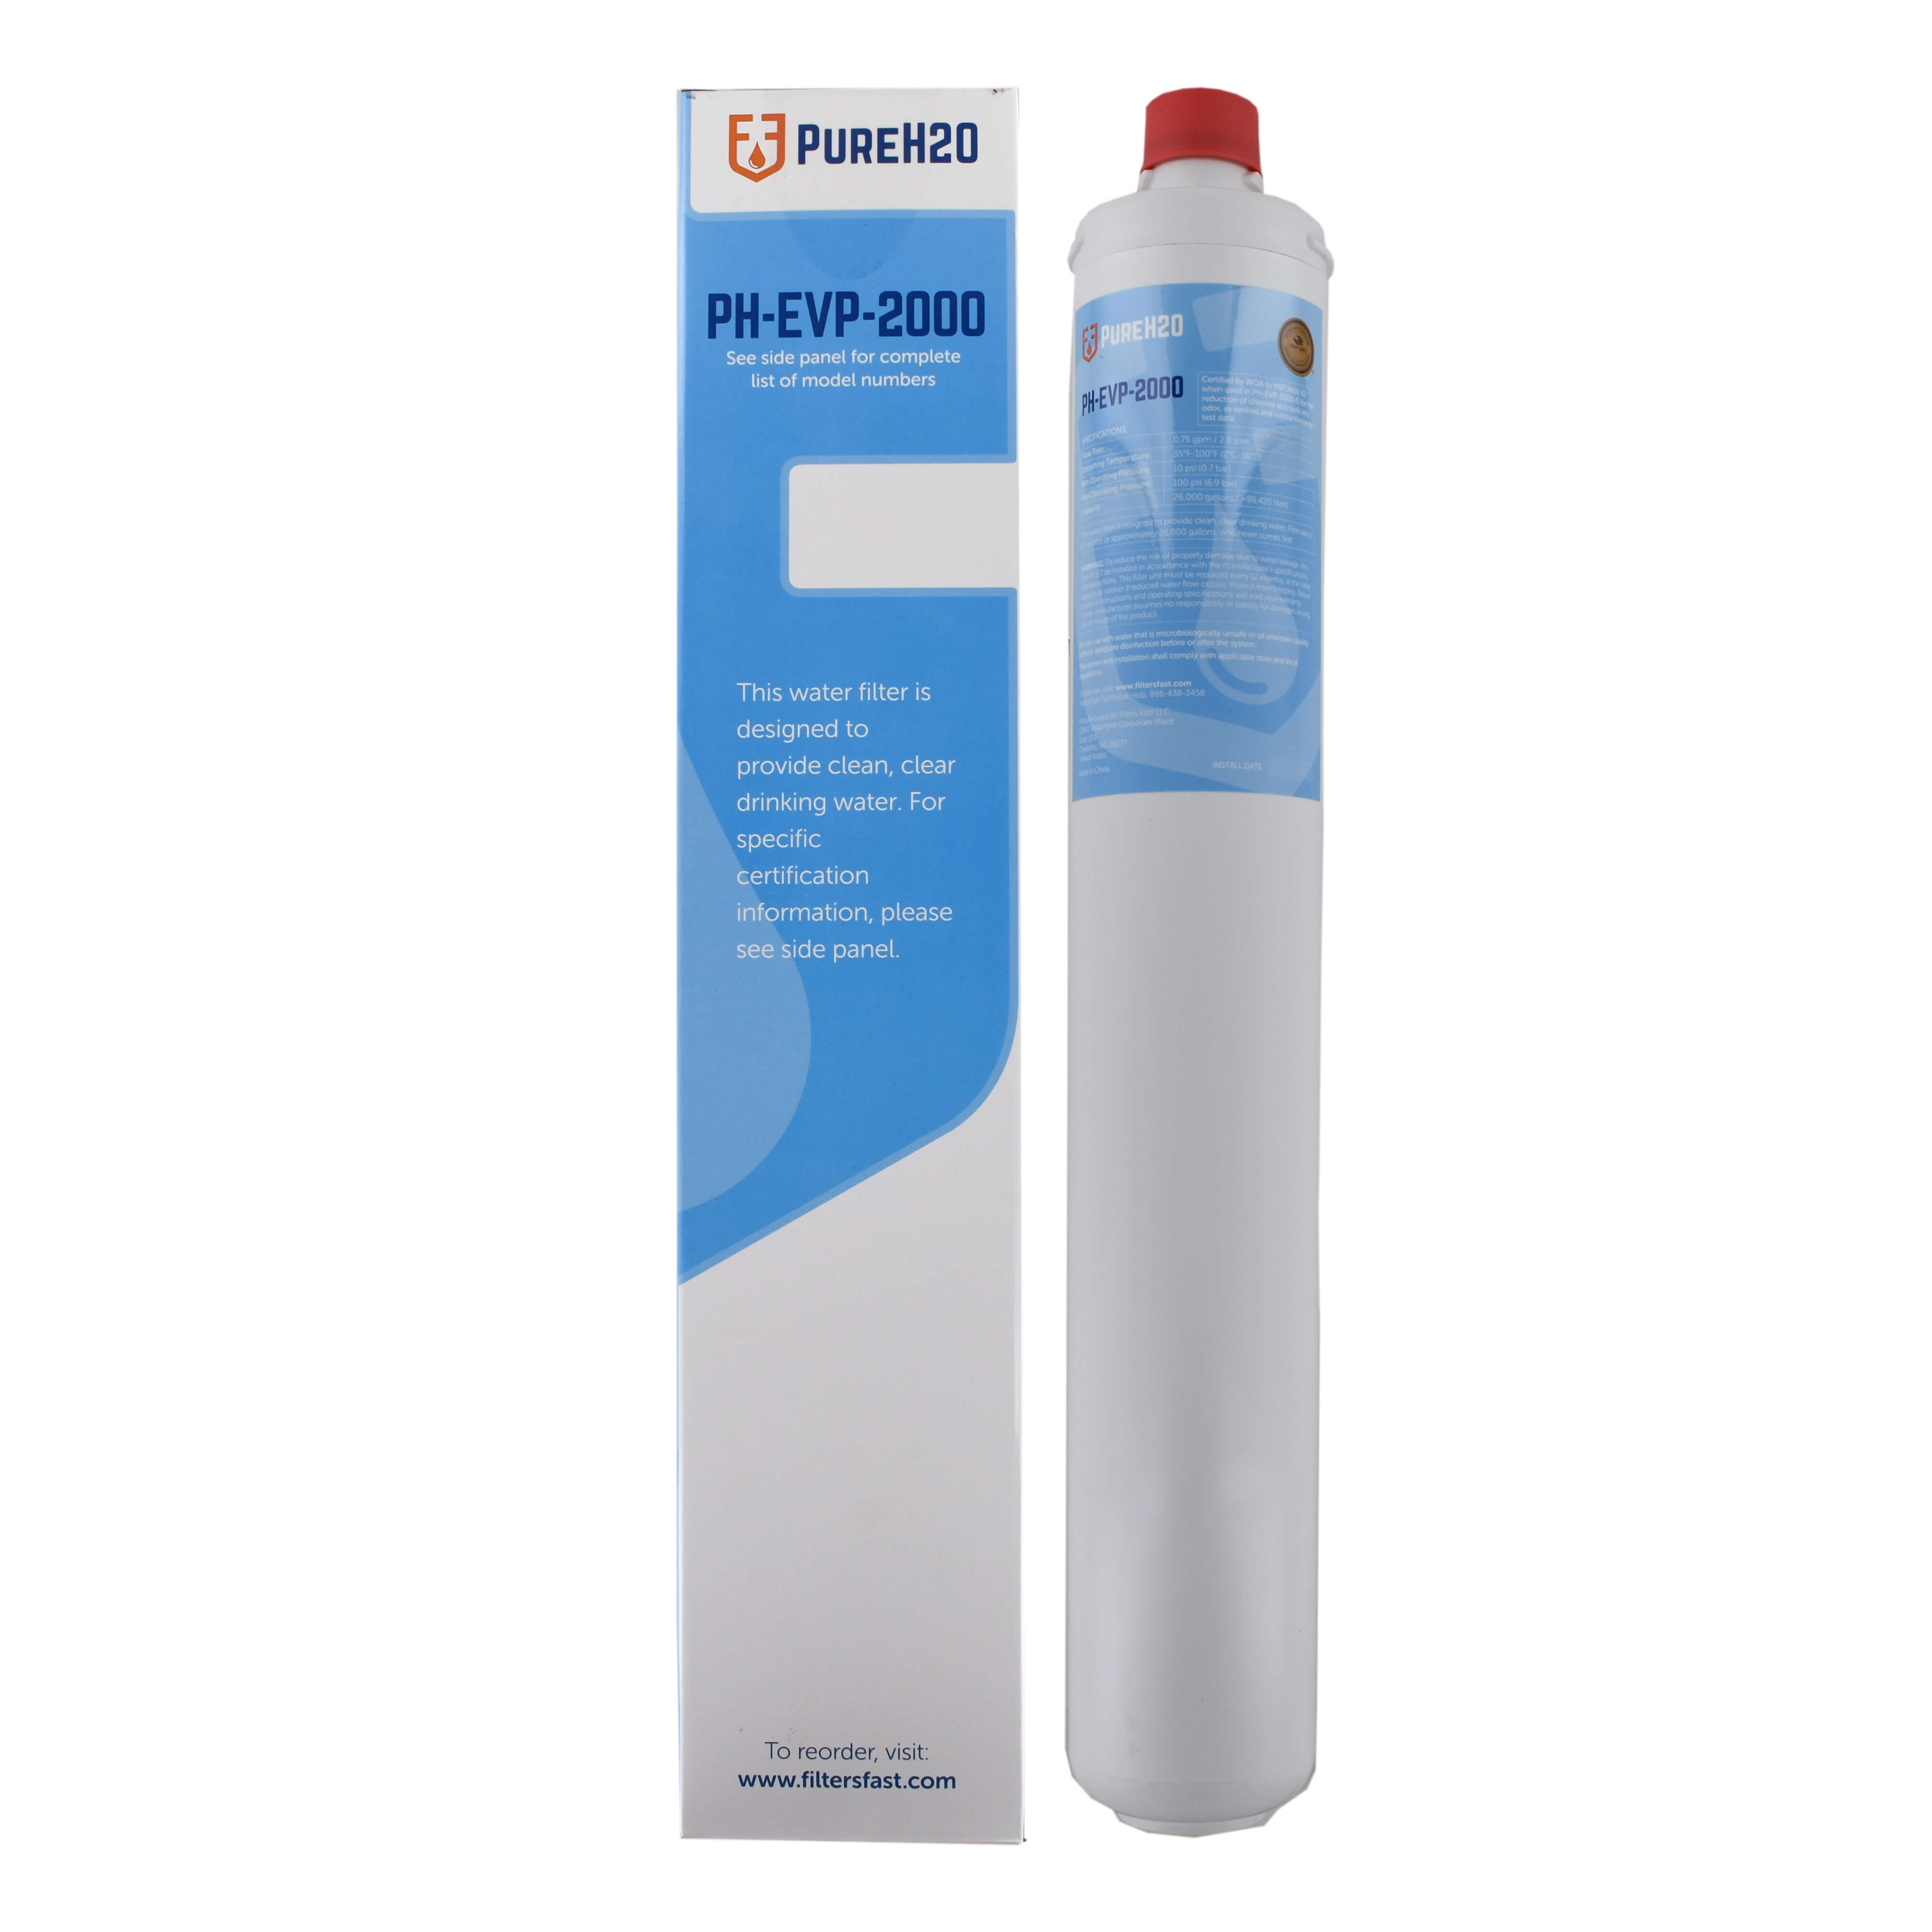 EV9612-22, i2000(2) PureH2O Replacement for Everpure EV9612-22, i2000(2) Insurice Water Filter thumbnail